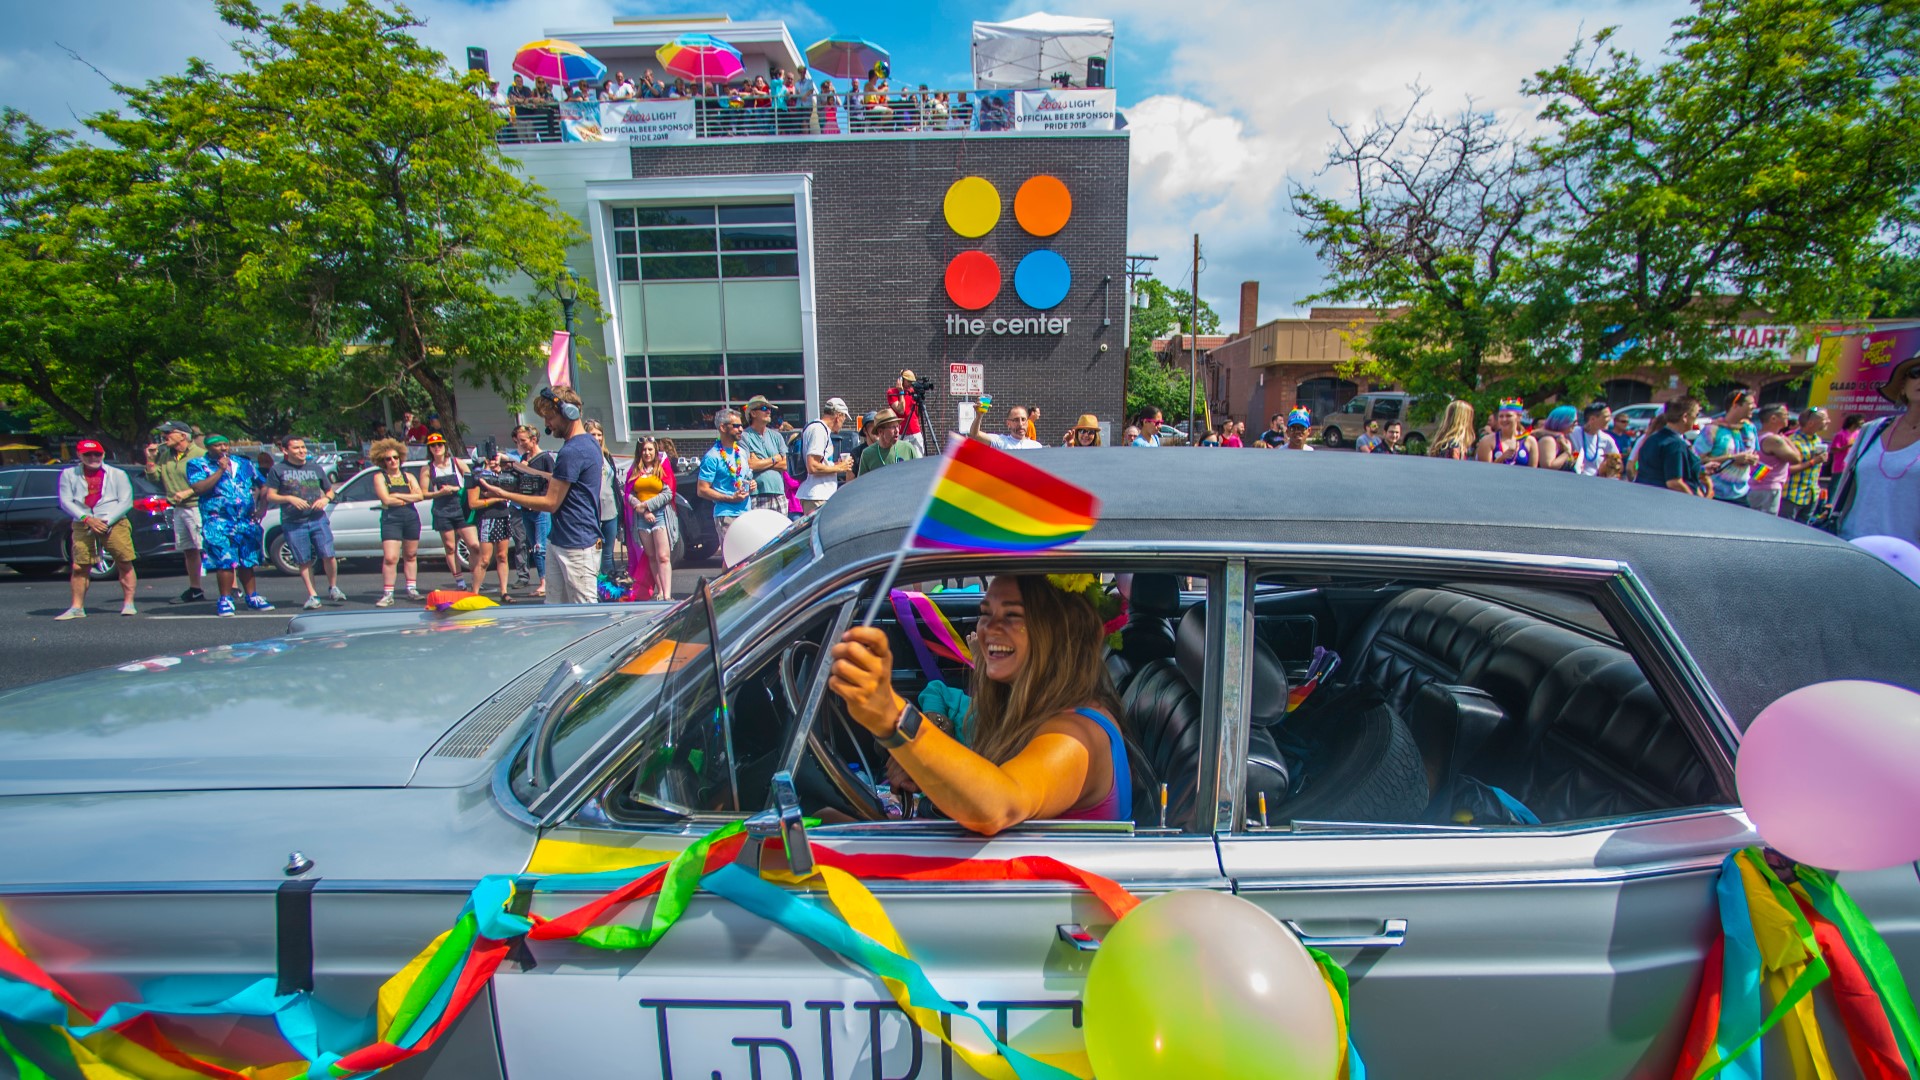 Did you know that the first LGBTQ pride celebration in Denver was held in 1975? This Colorado Culture segment looks at how the LGBTQ community has impacted Colorado, as well as the entire country.